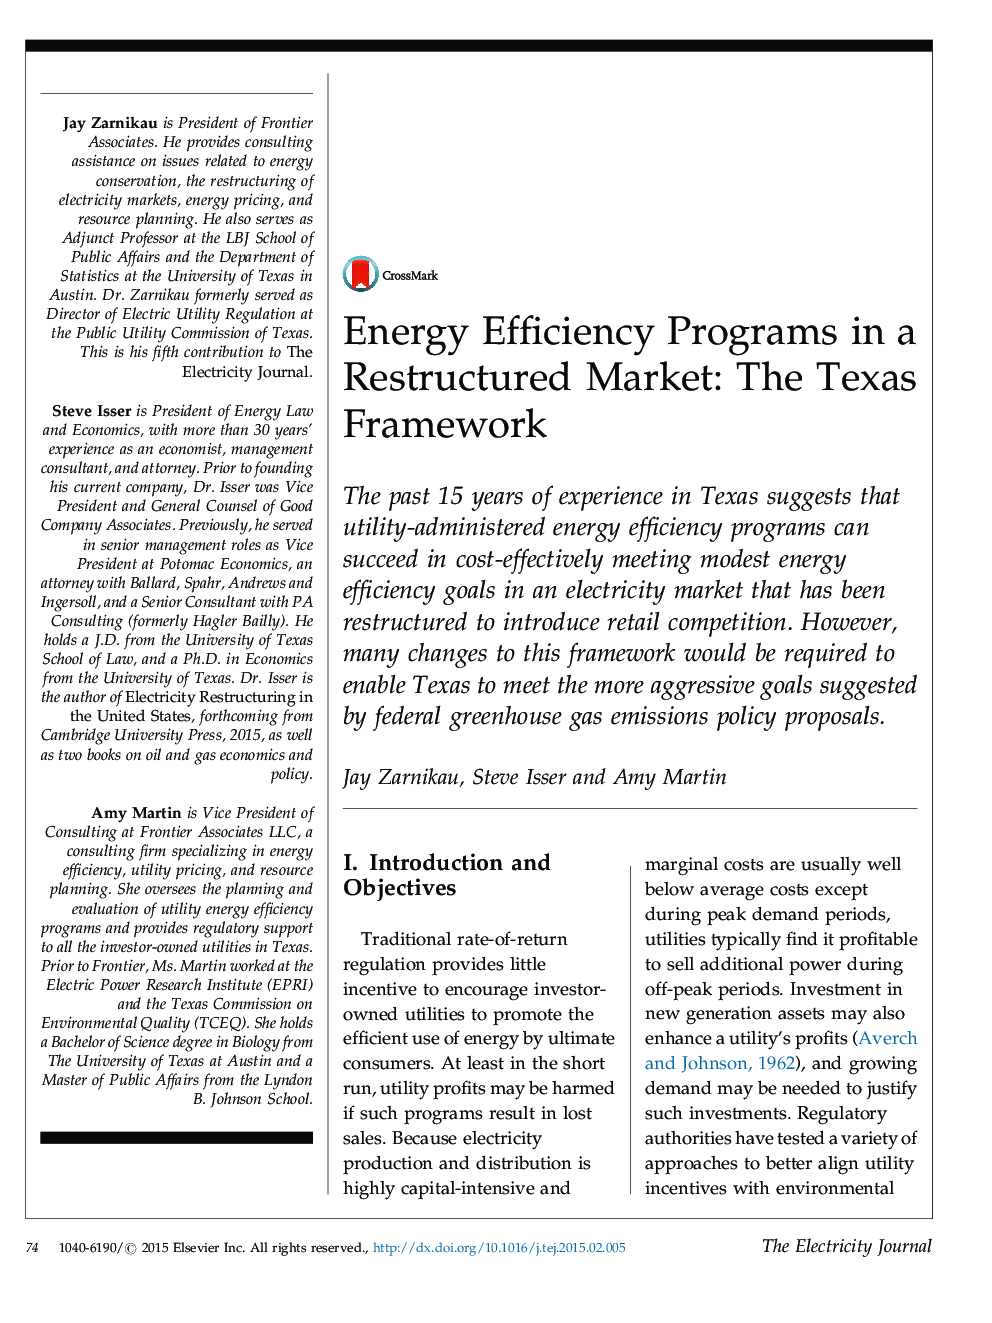 Energy Efficiency Programs in a Restructured Market: The Texas Framework